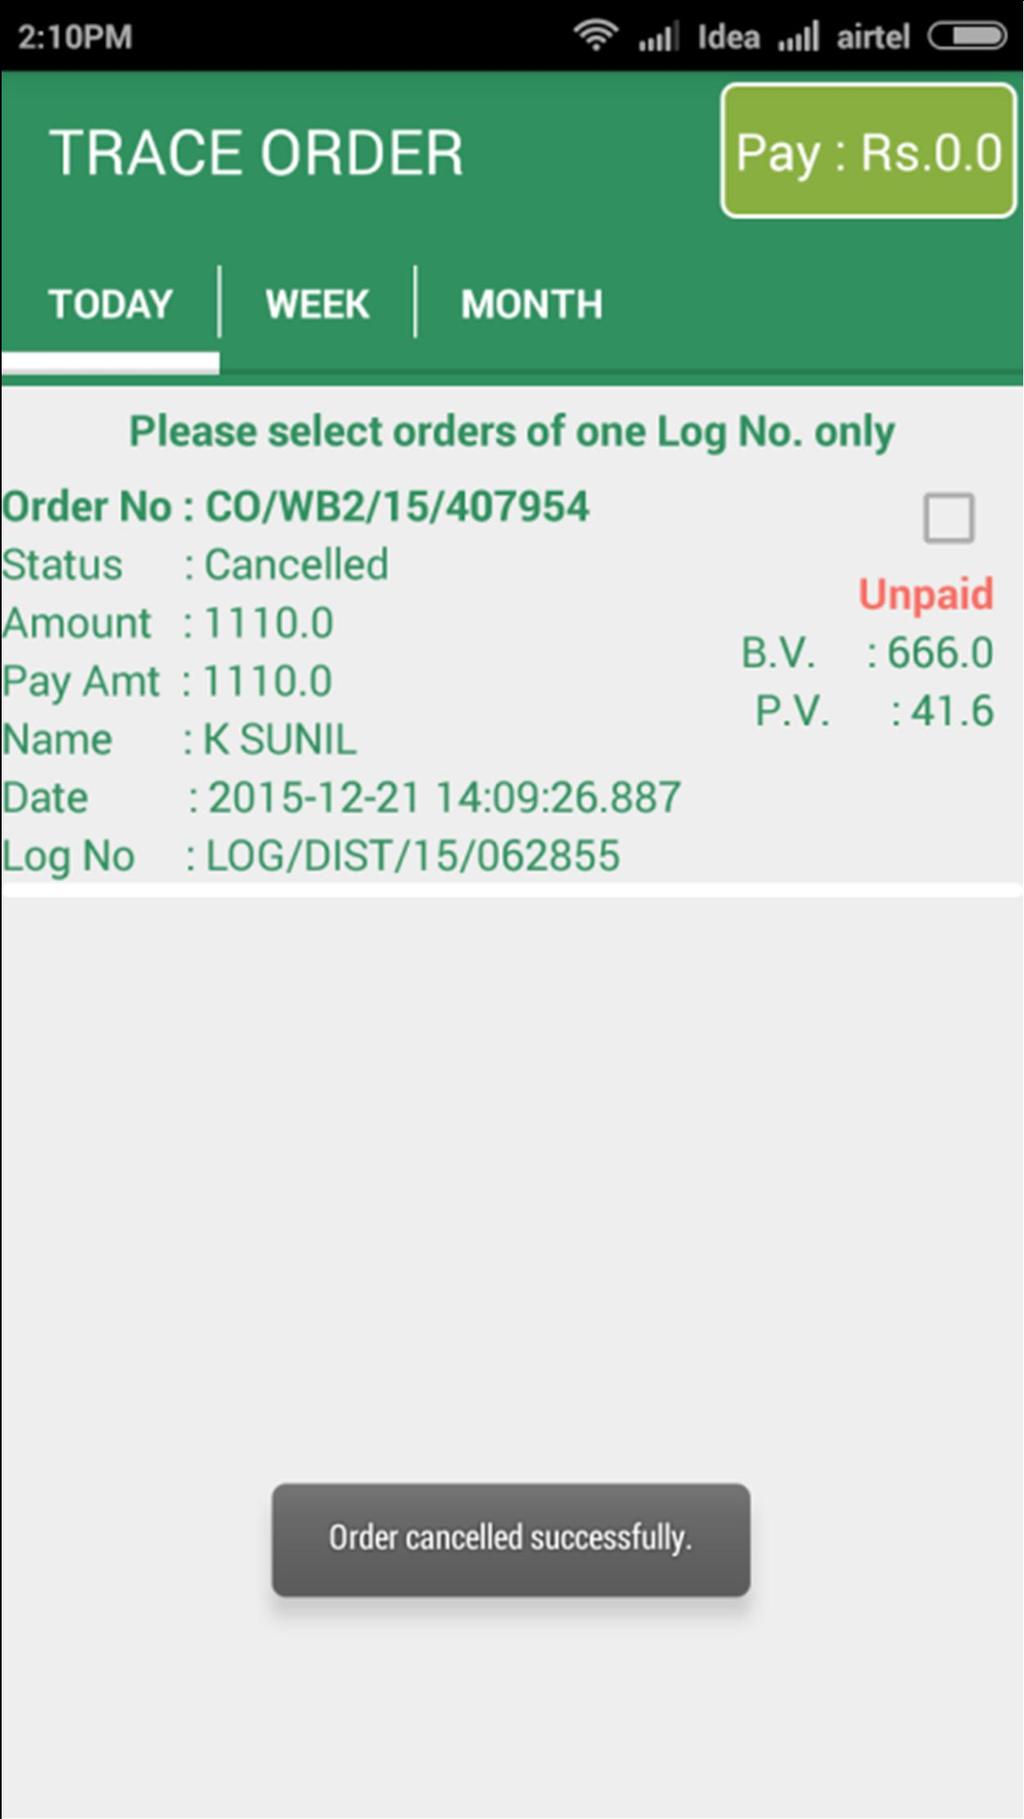 Order Cancelled (See Status) 9.